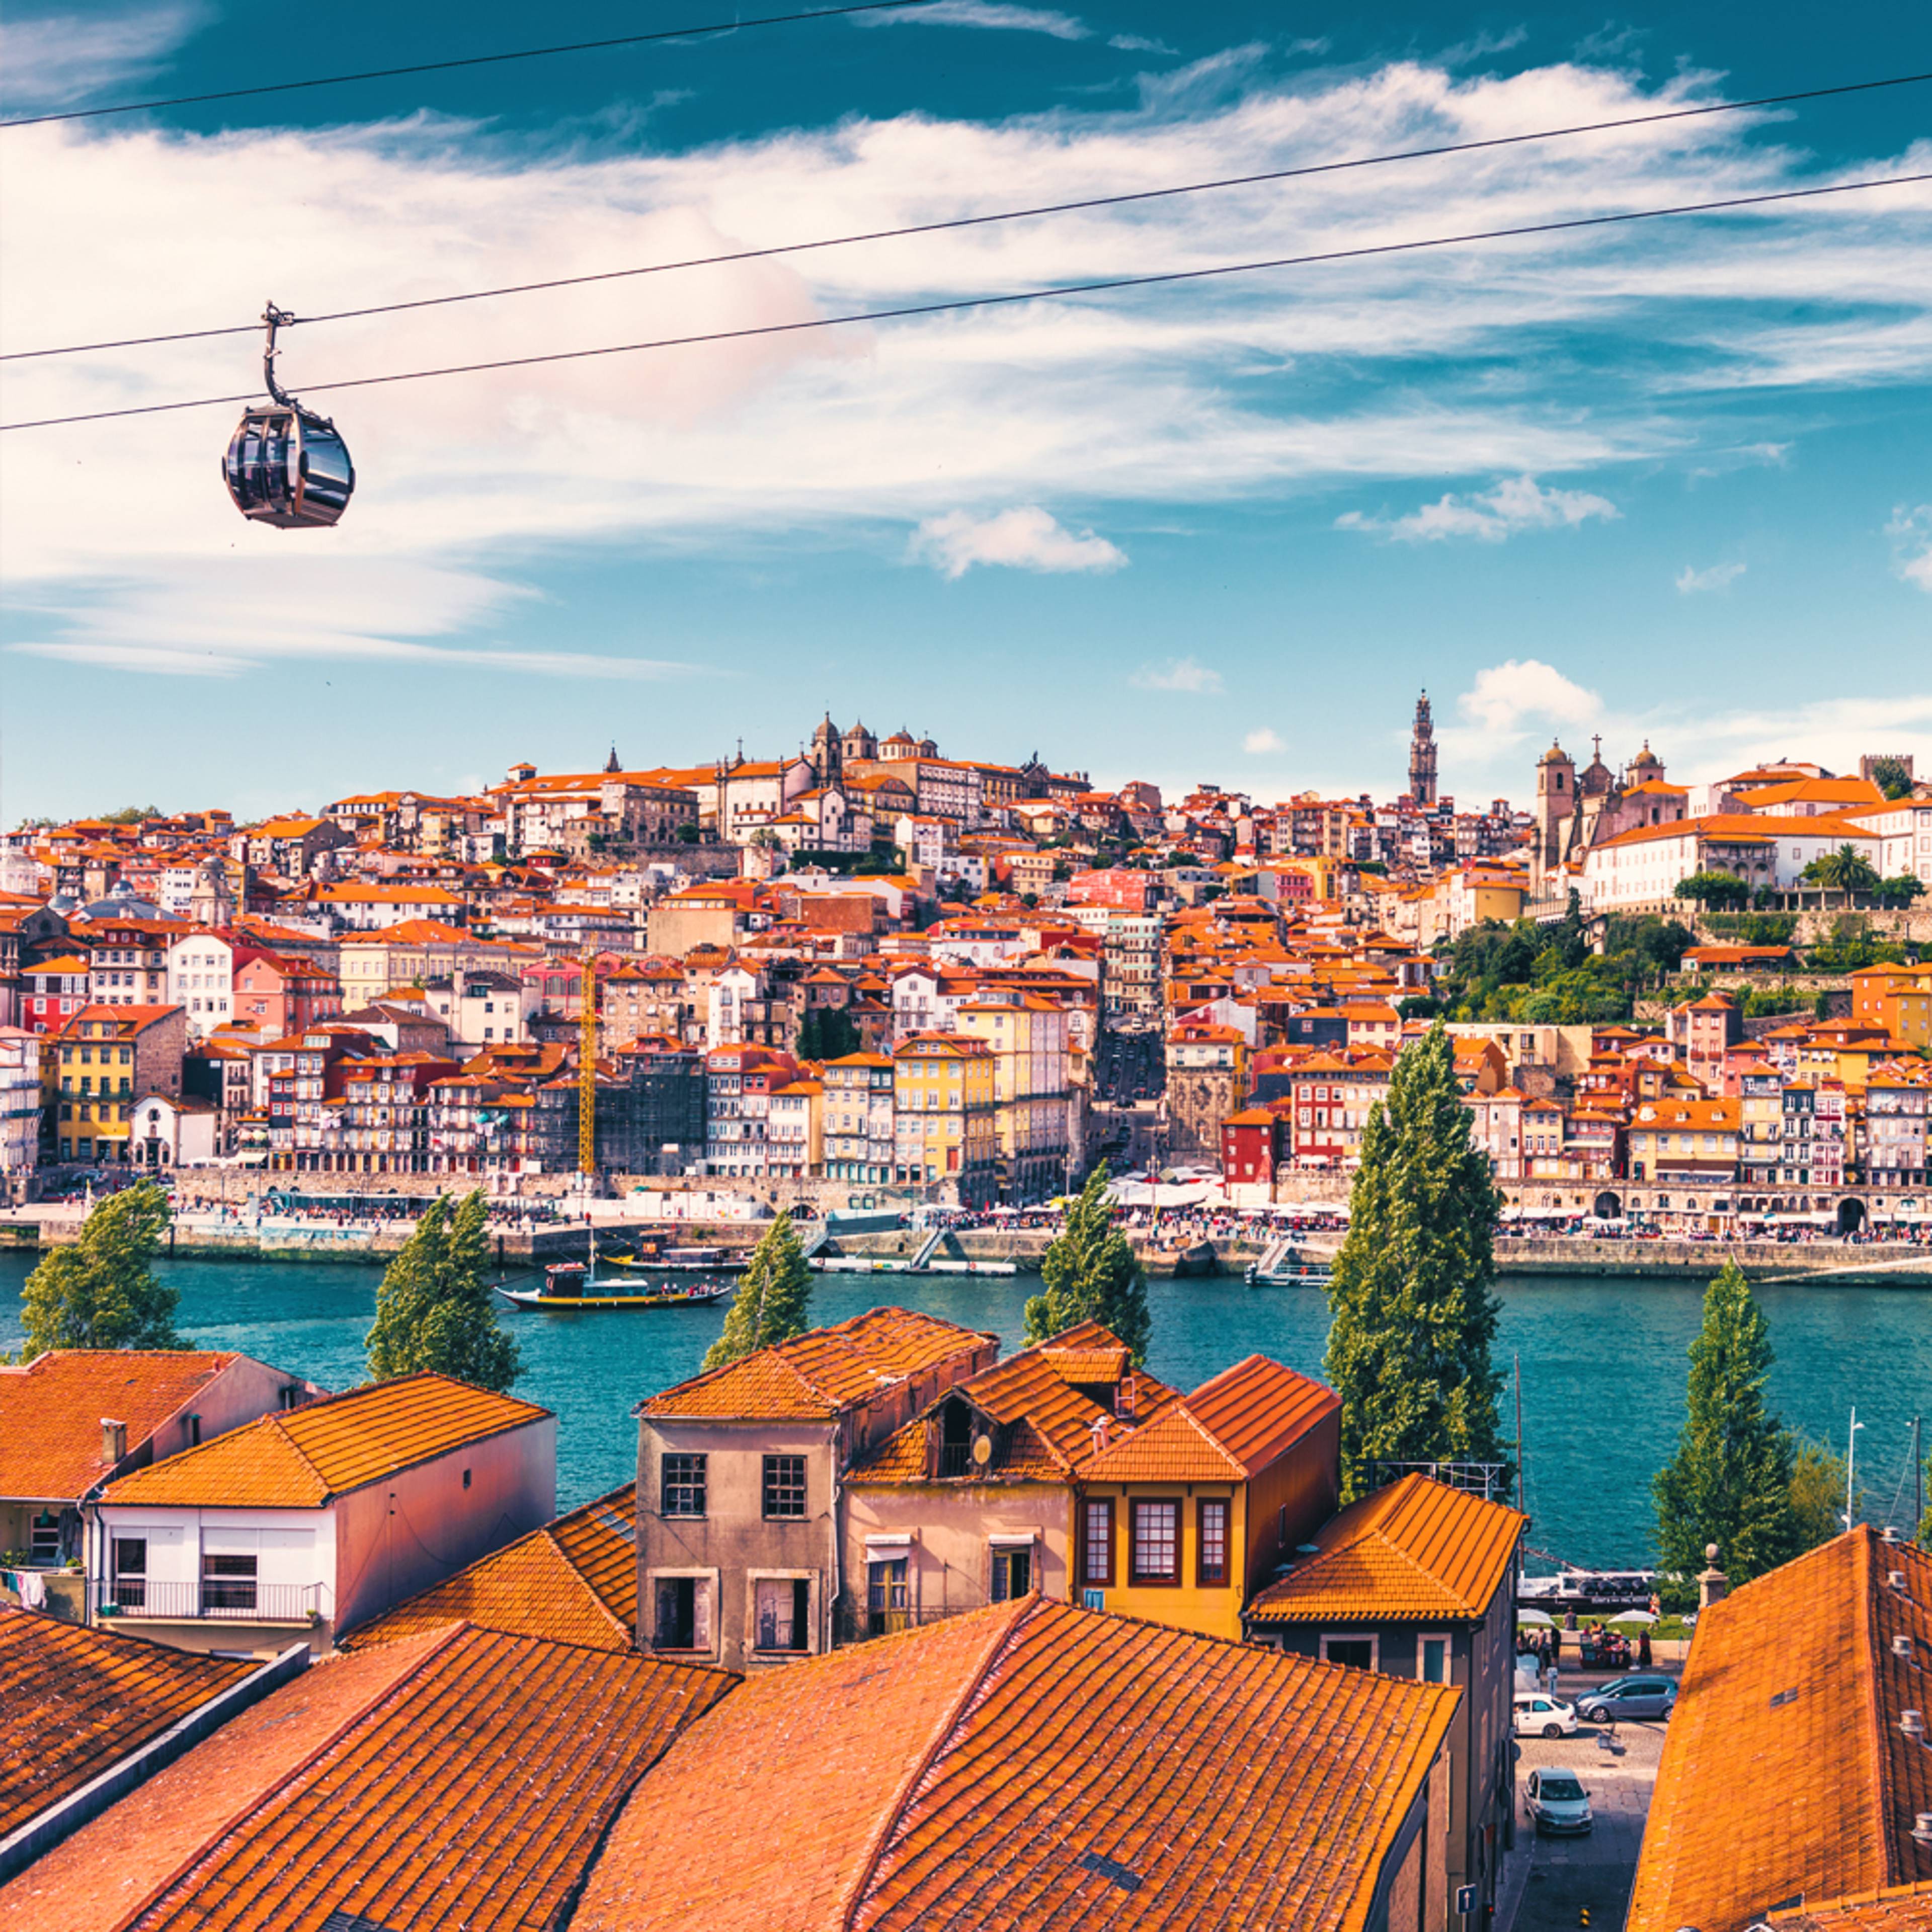 Design your perfect weekend trip with a local expert in Portugal